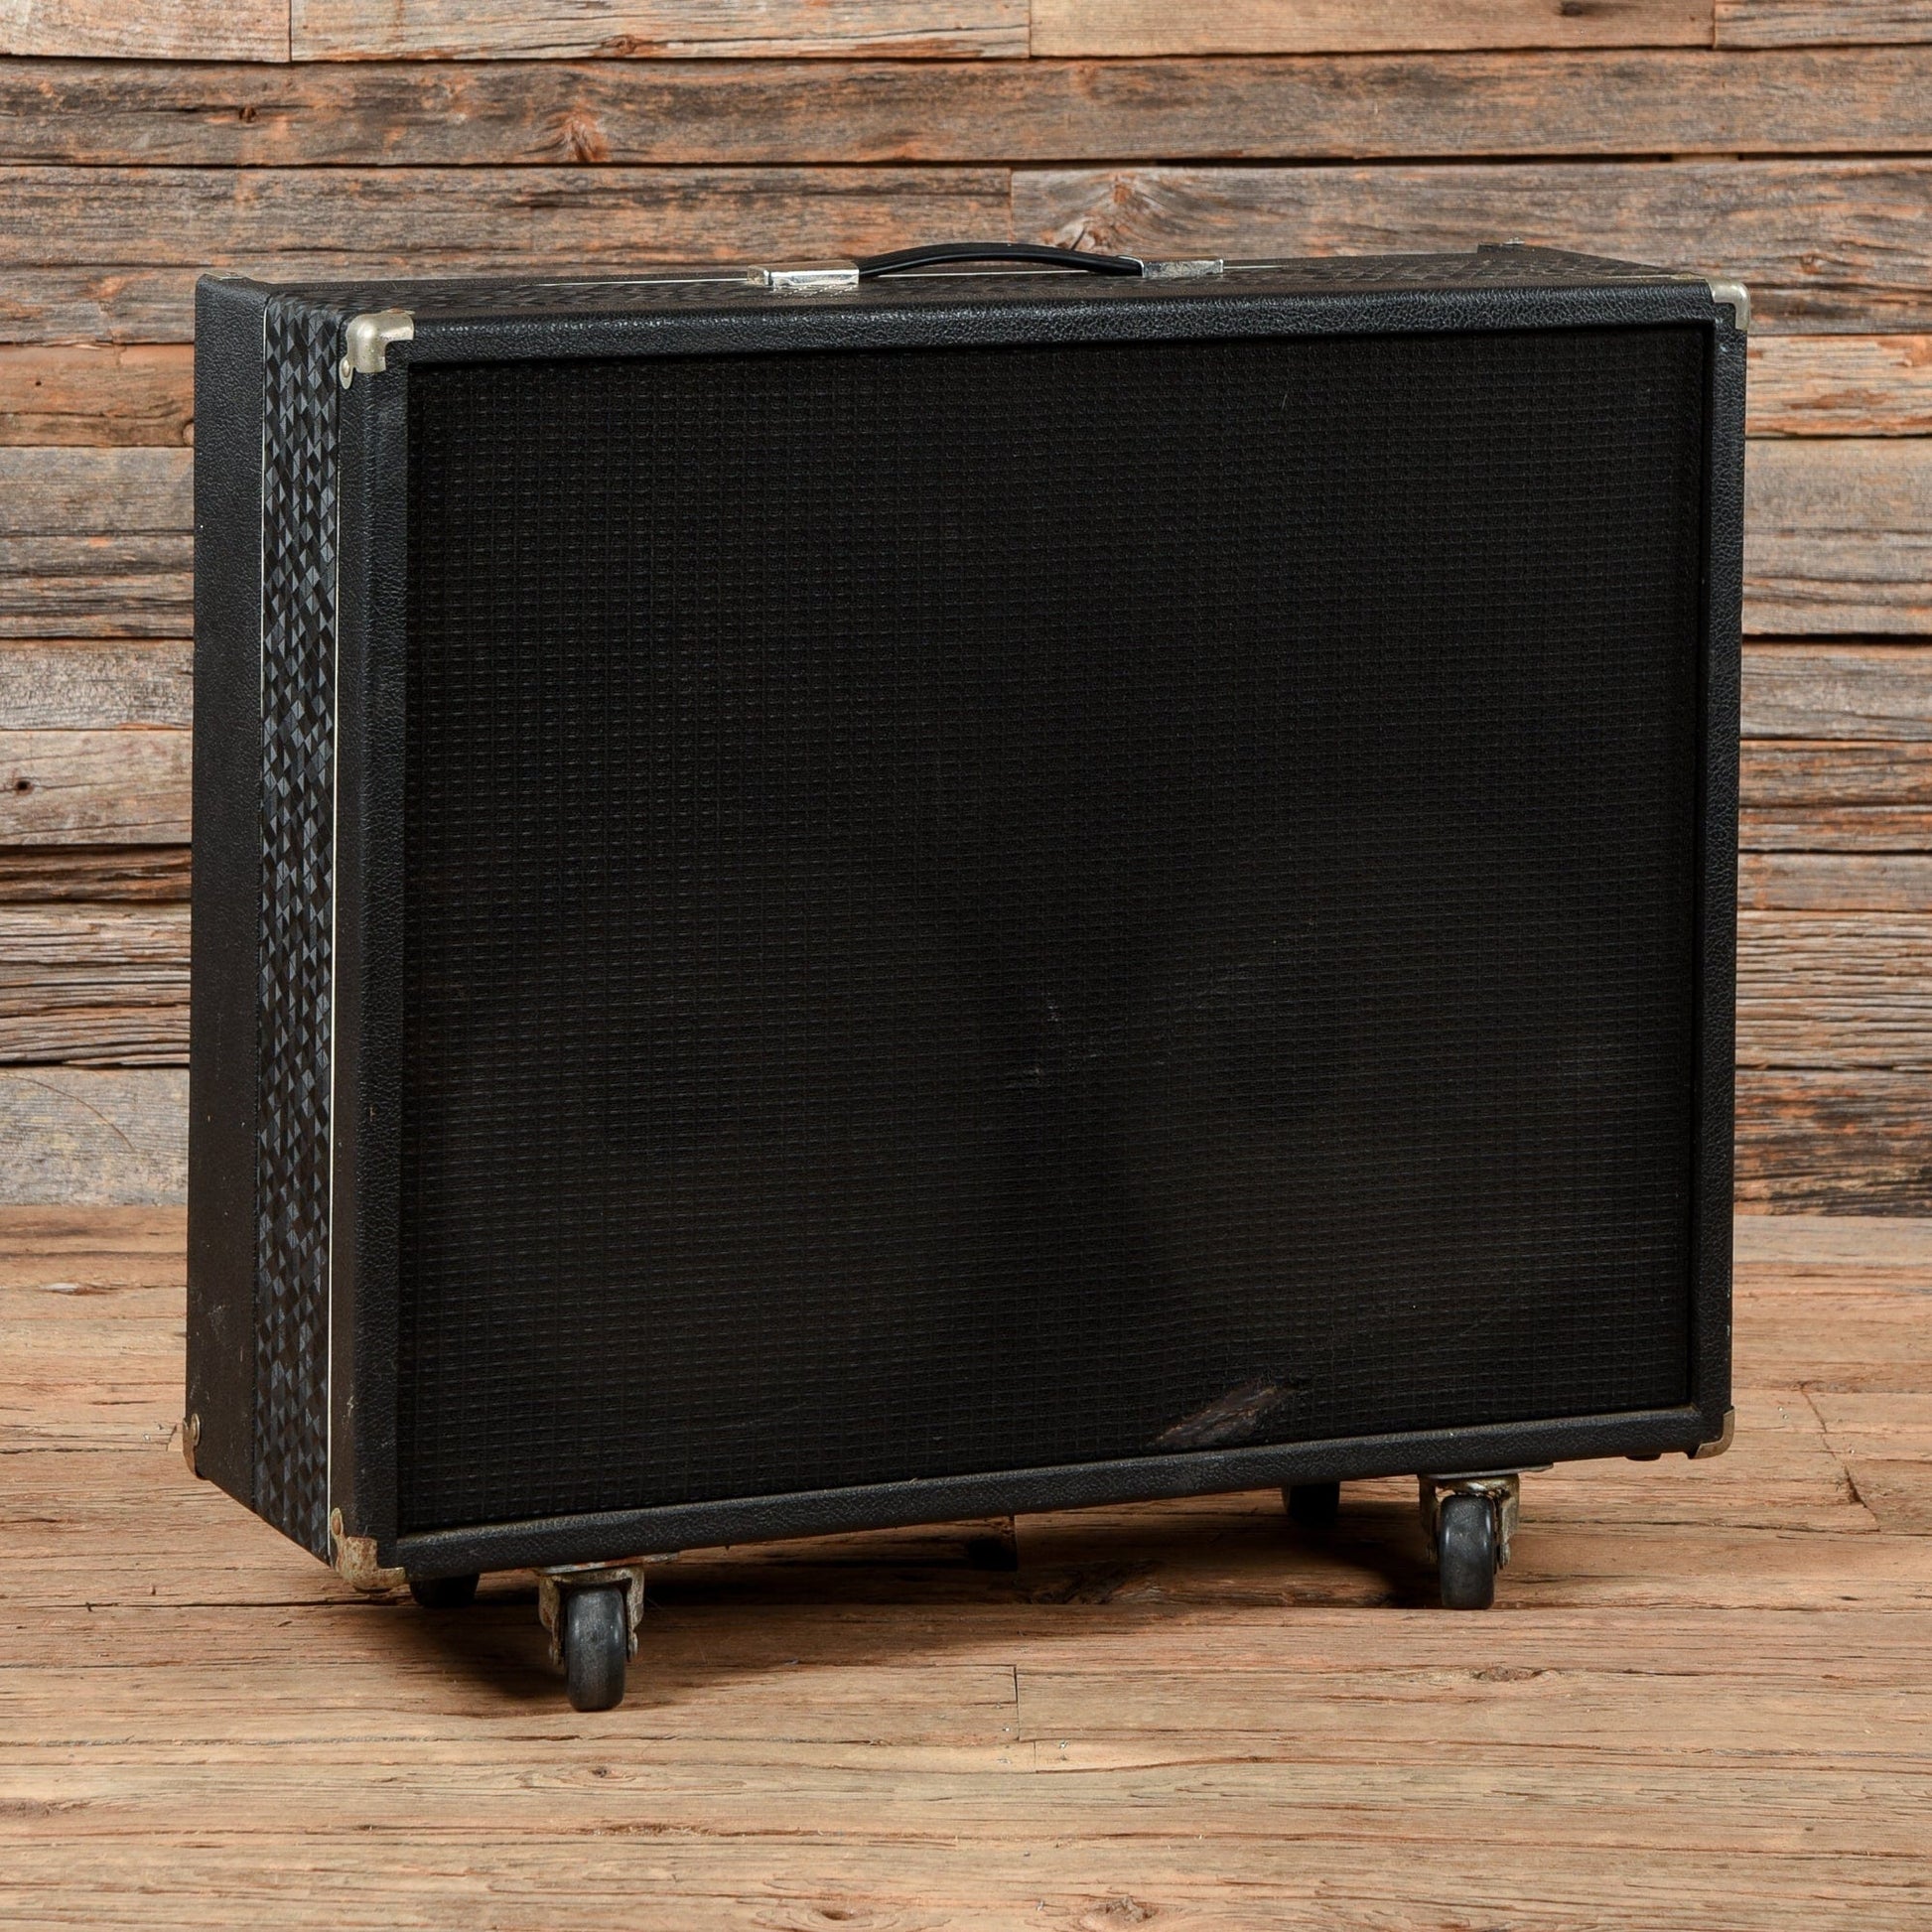 Twilighter 260R 2x10" Combo Amplifier  1967 Amps / Guitar Cabinets